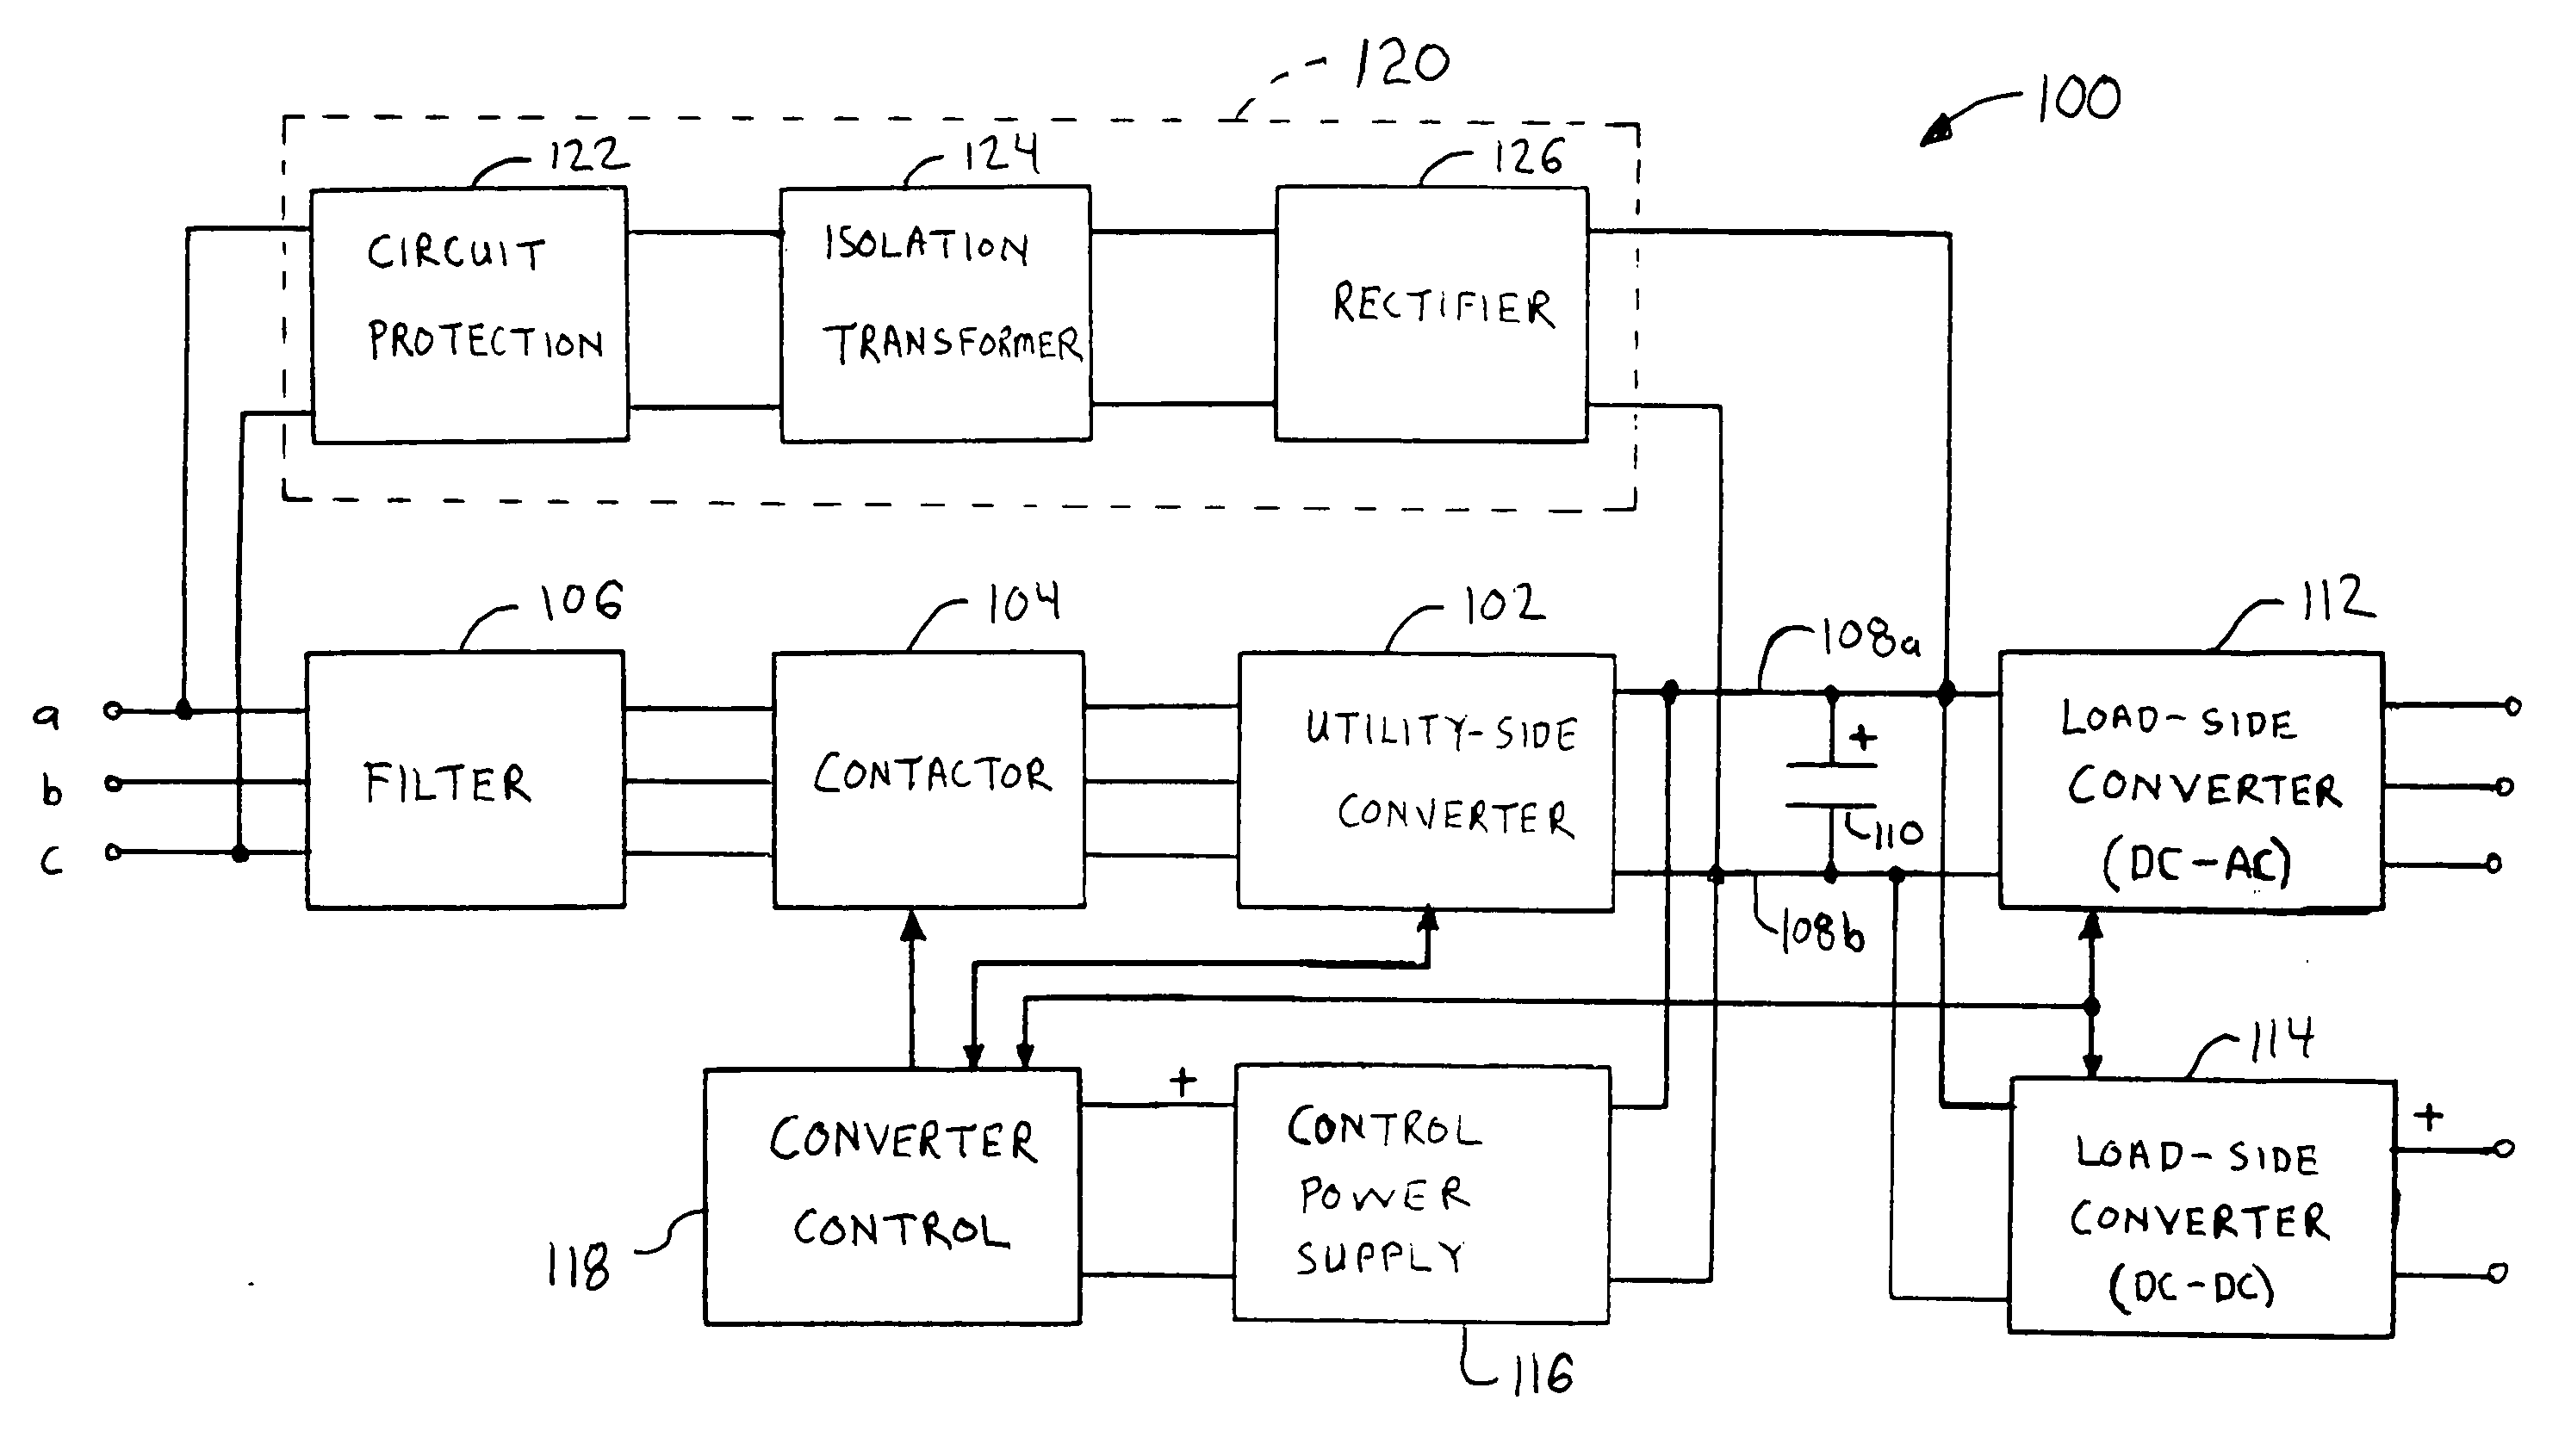 System and method for pre-charging the DC bus of a utility connected power converter